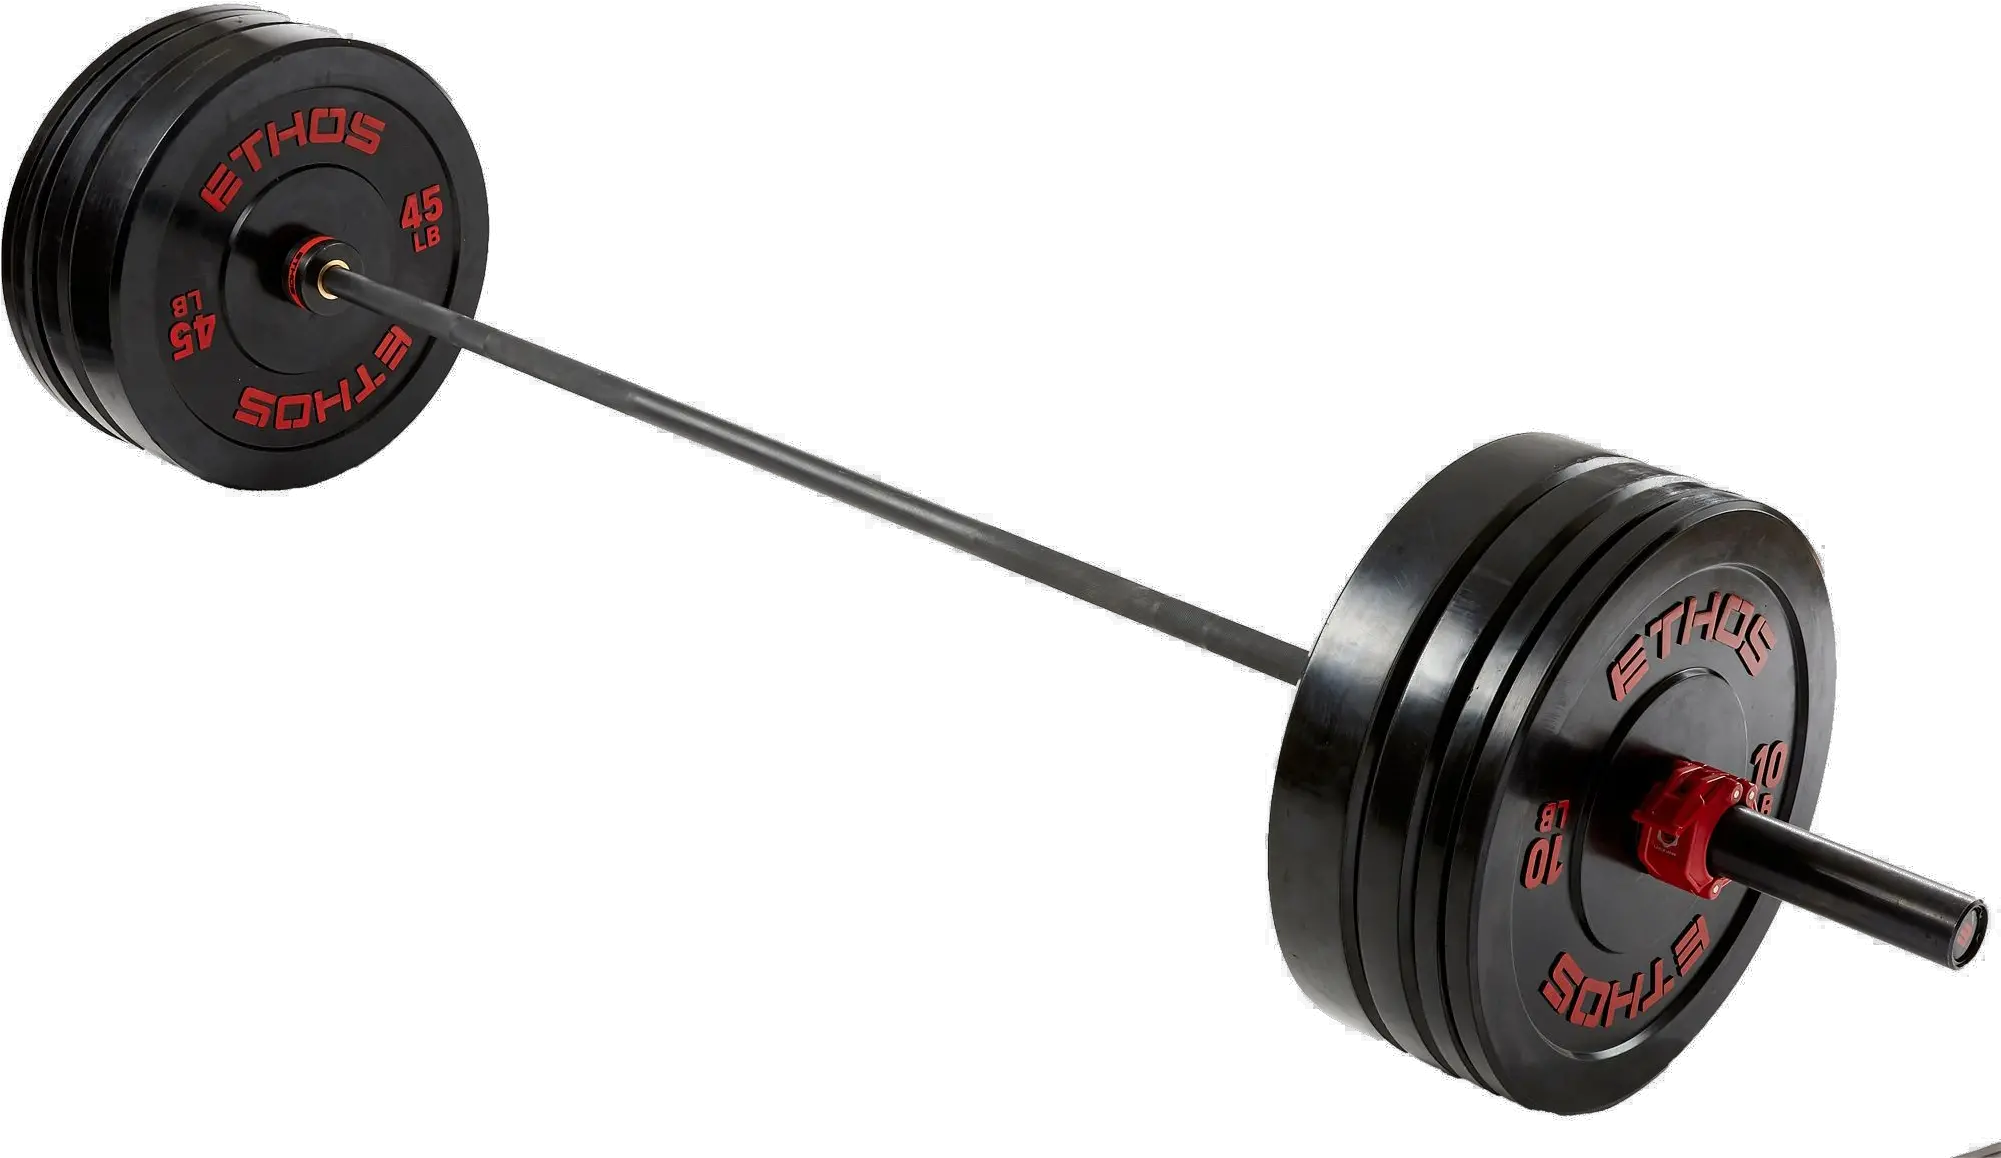 Barbell Png Image Ethos 205 Lb Olympic Rubber Bumper Plate Set Barbell Png